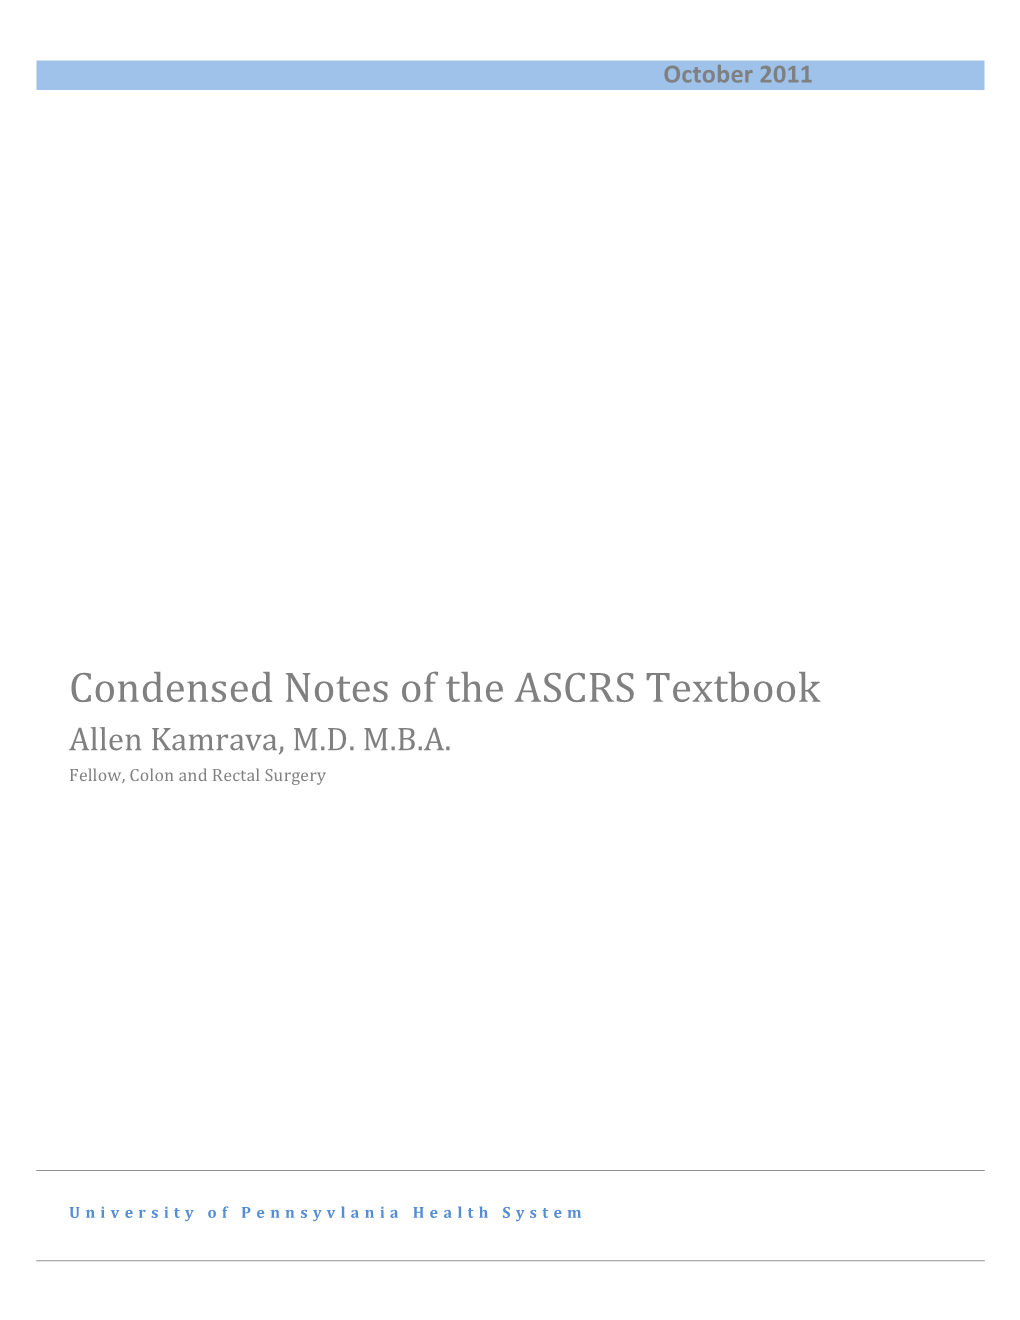 Condensed Notes of the ASCRS Textbook Allen Kamrava, M.D